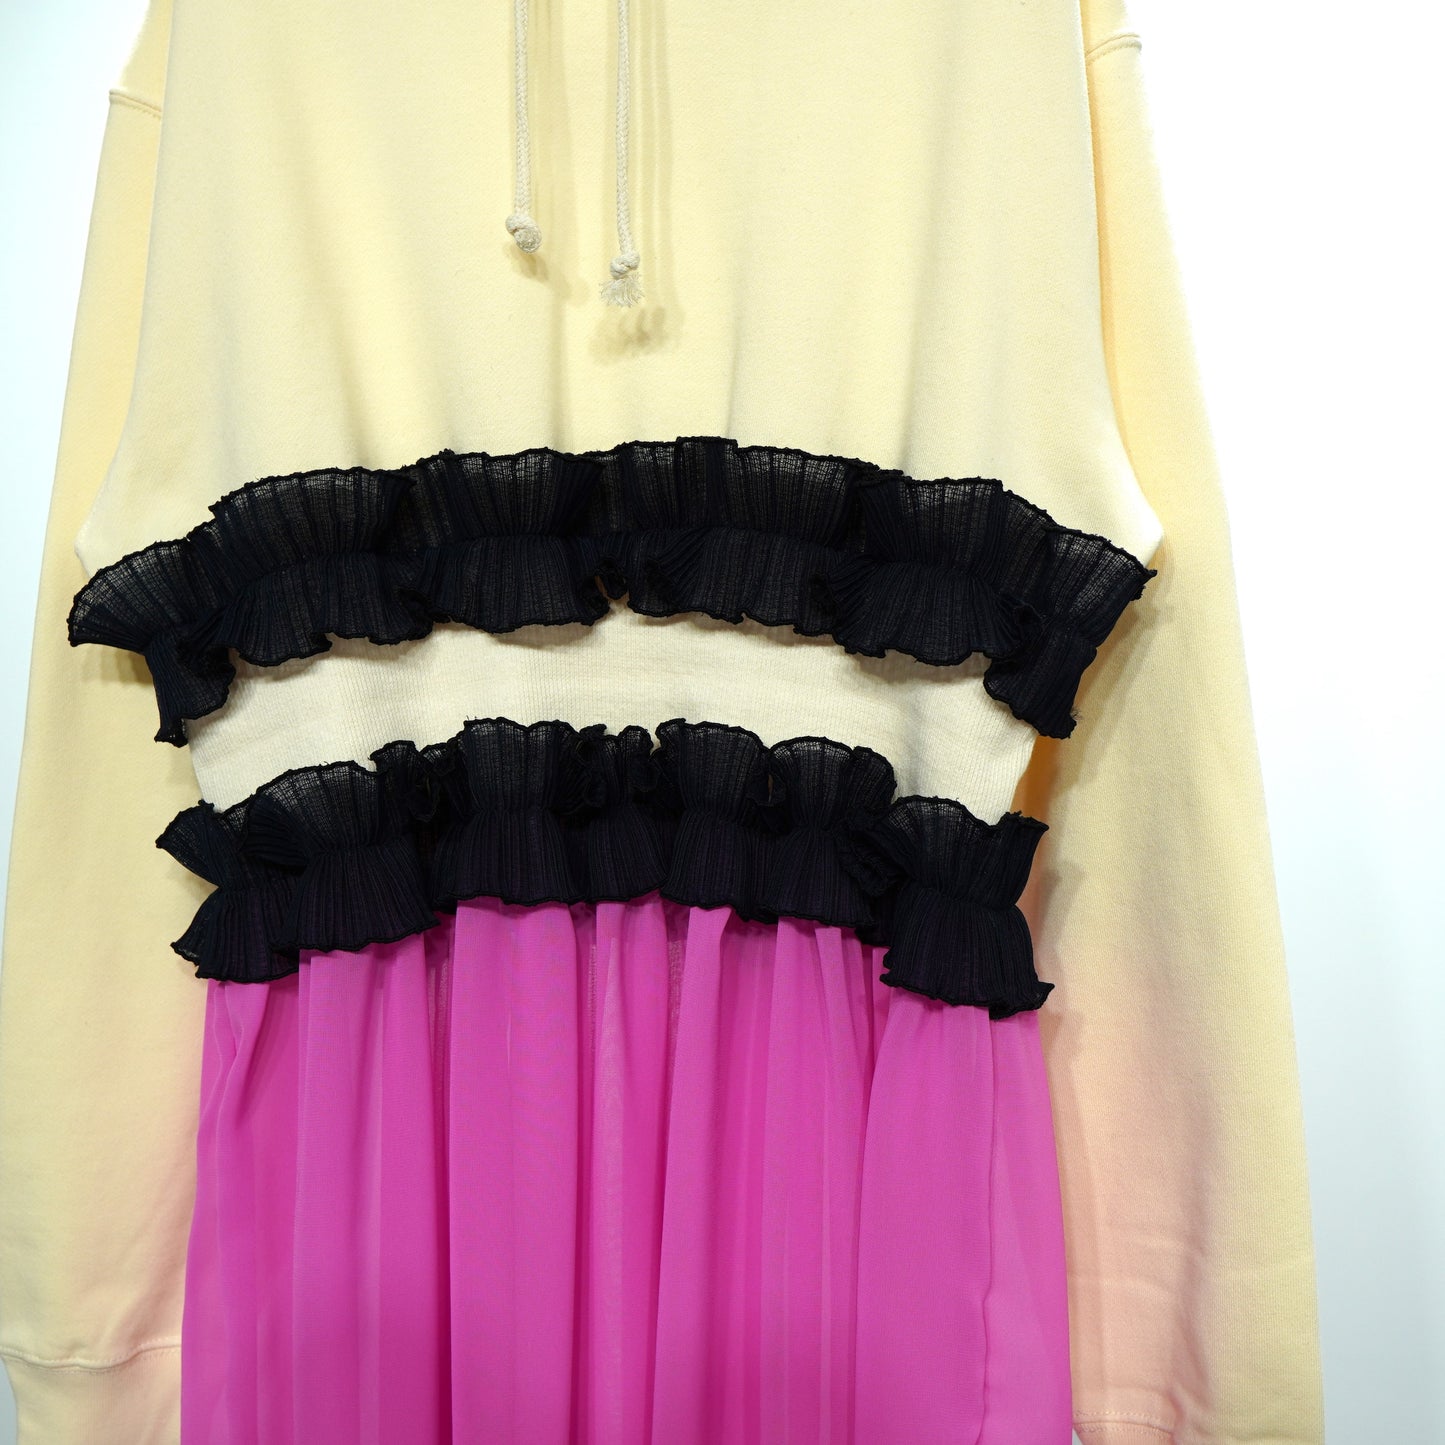 NON TOKYO / PLEATS FRILL HOODIE ONE-PIECE (WHITE×PINK) / 〈ノントーキョー〉プリーツフリルフーディーワンピース (ホワイト×ピンク)